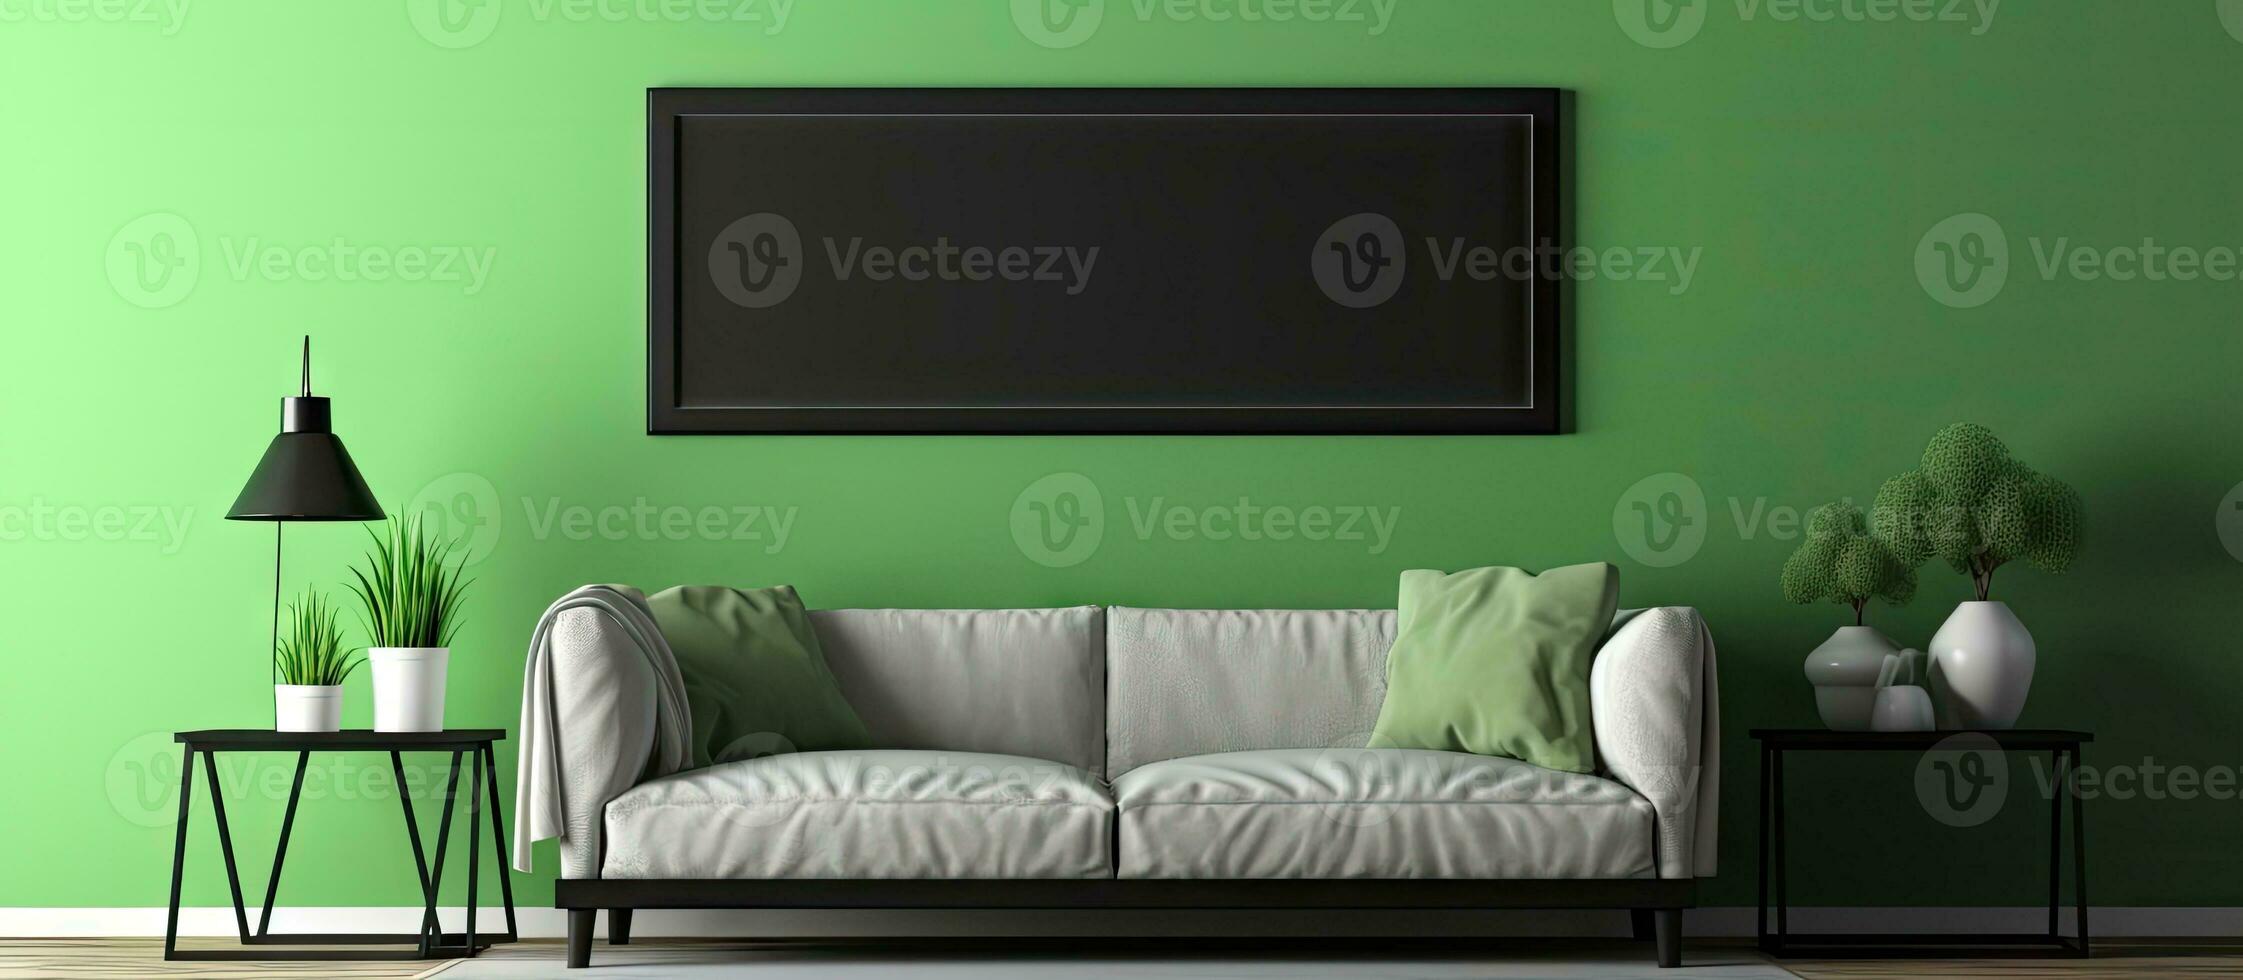 Modern interior room rendered in featuring a sofa floor lamp shelves carpet on black wooden floor and an empty picture frame on a green wall photo